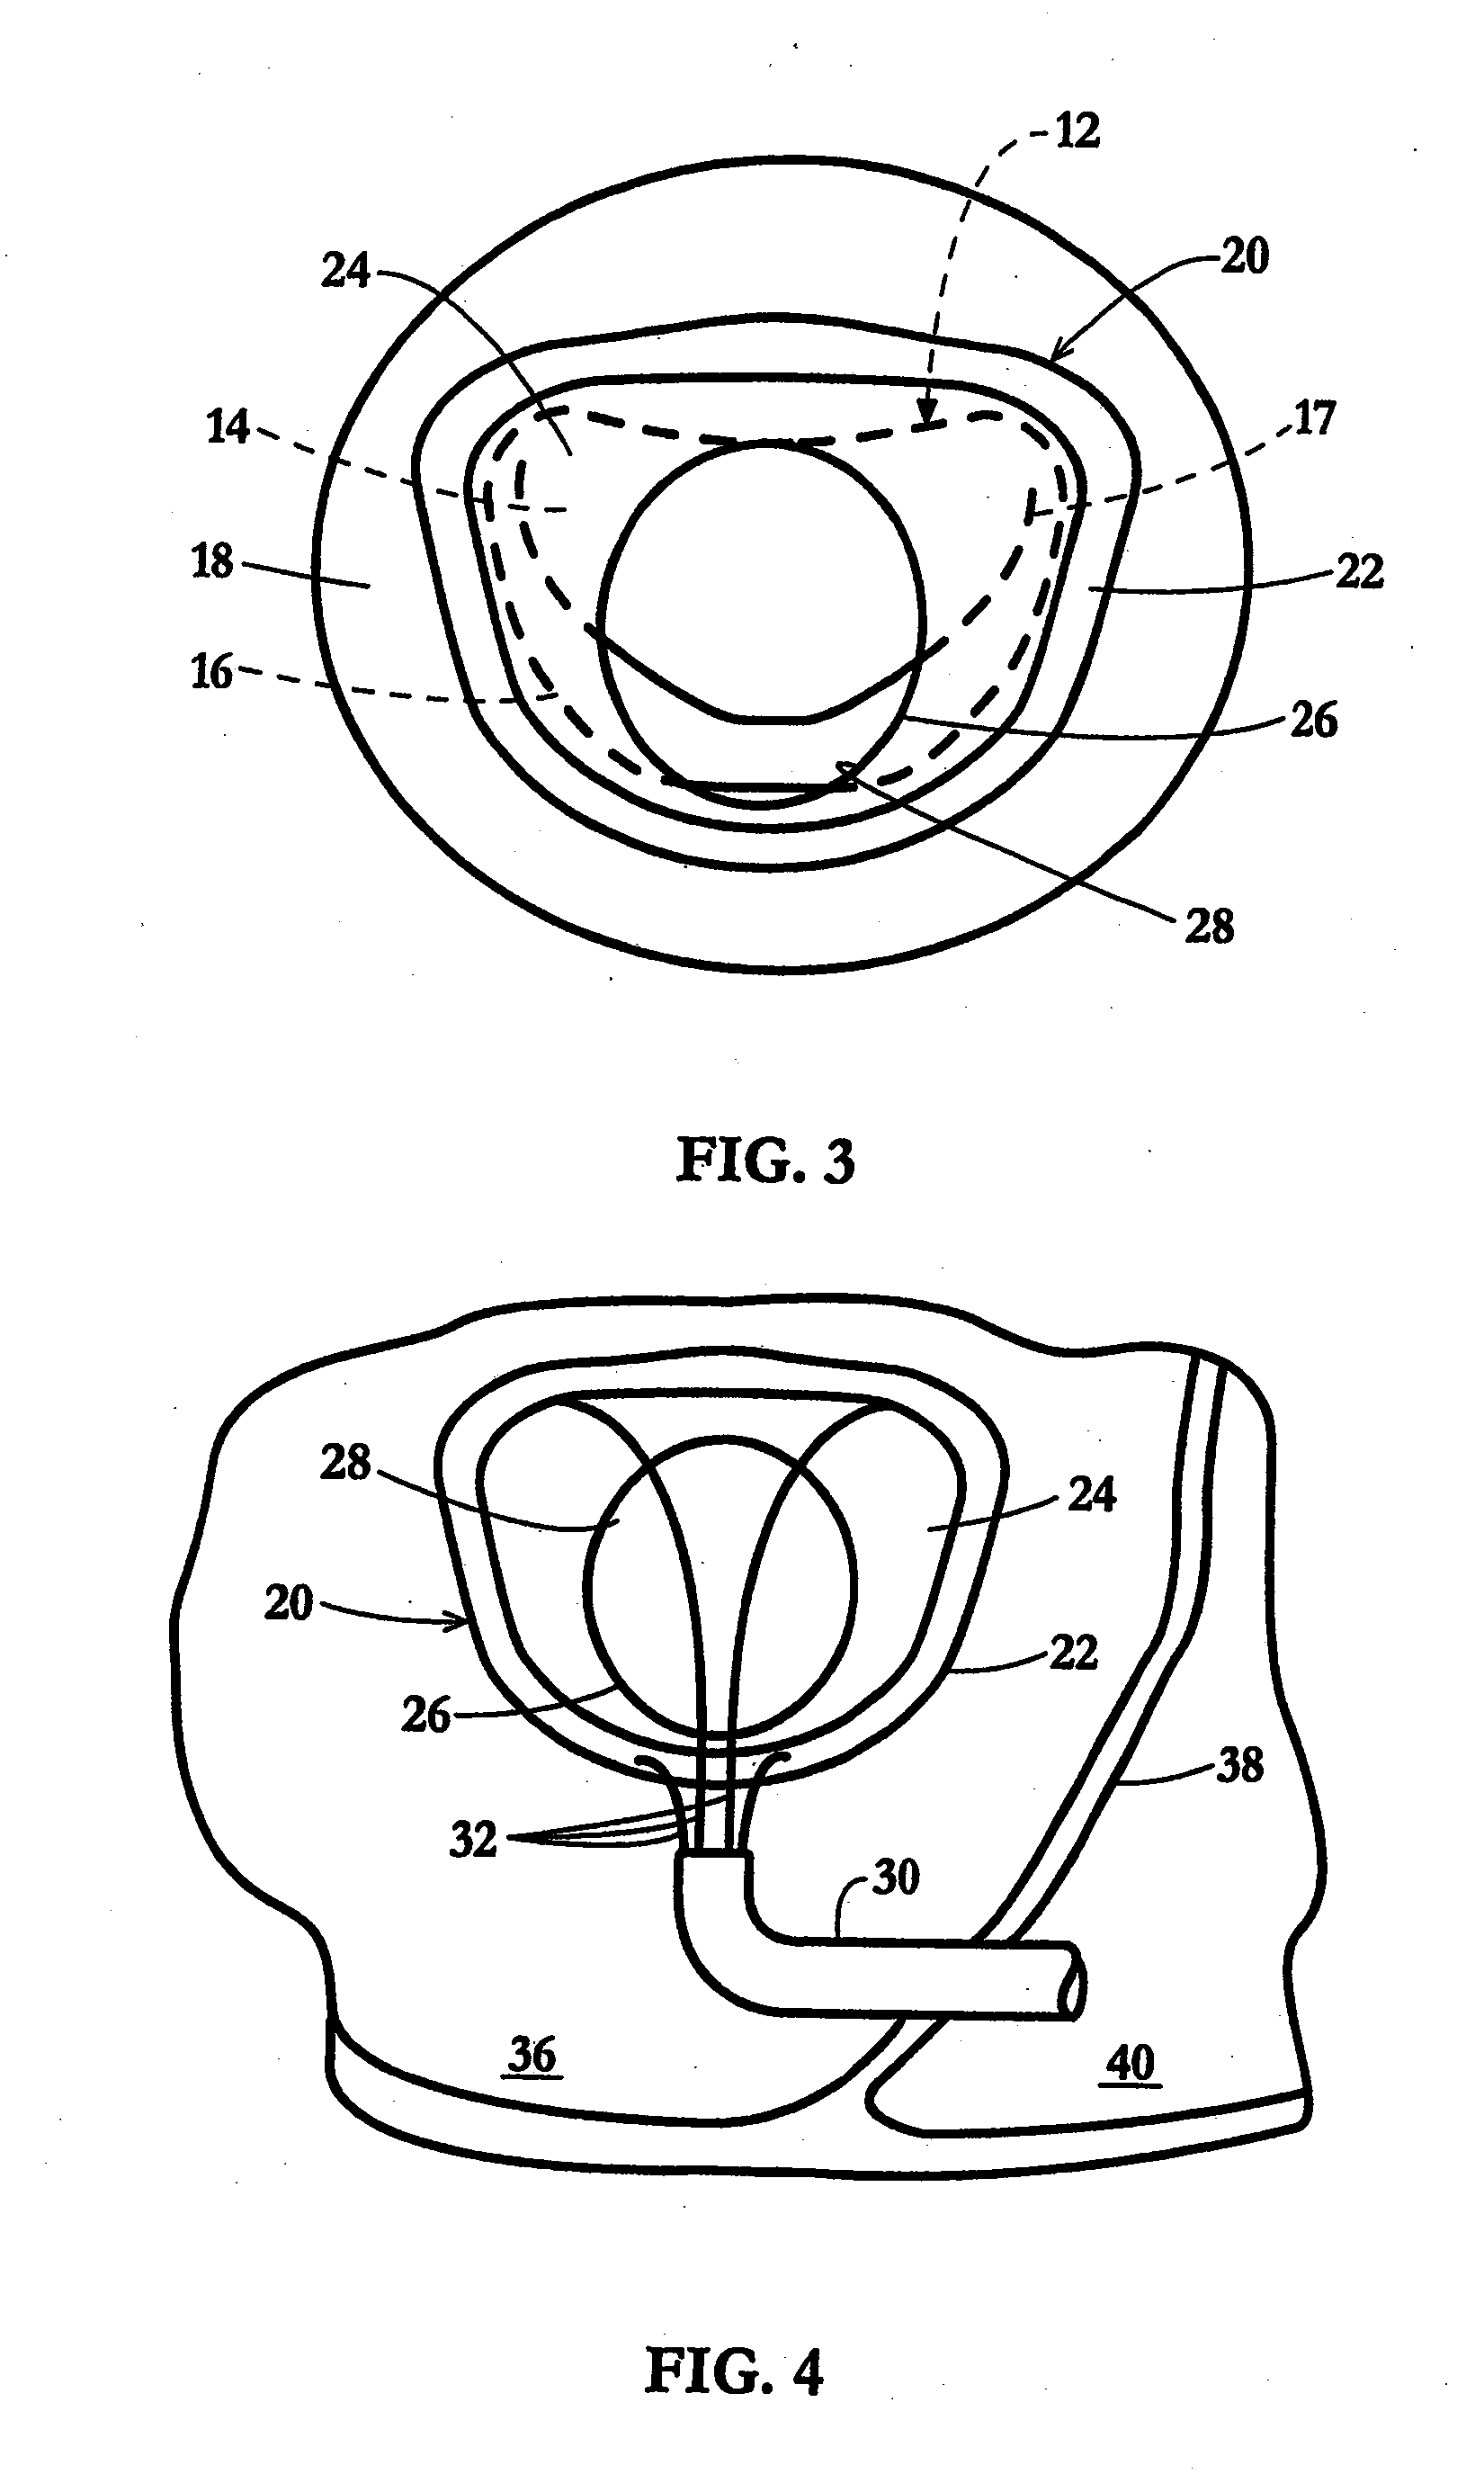 Device and Method for Temporary or Permanent Suspension of an Implantable Scaffolding Containing an Orifice for Placement of a Prosthetic or Bio-Prosthetic Valve